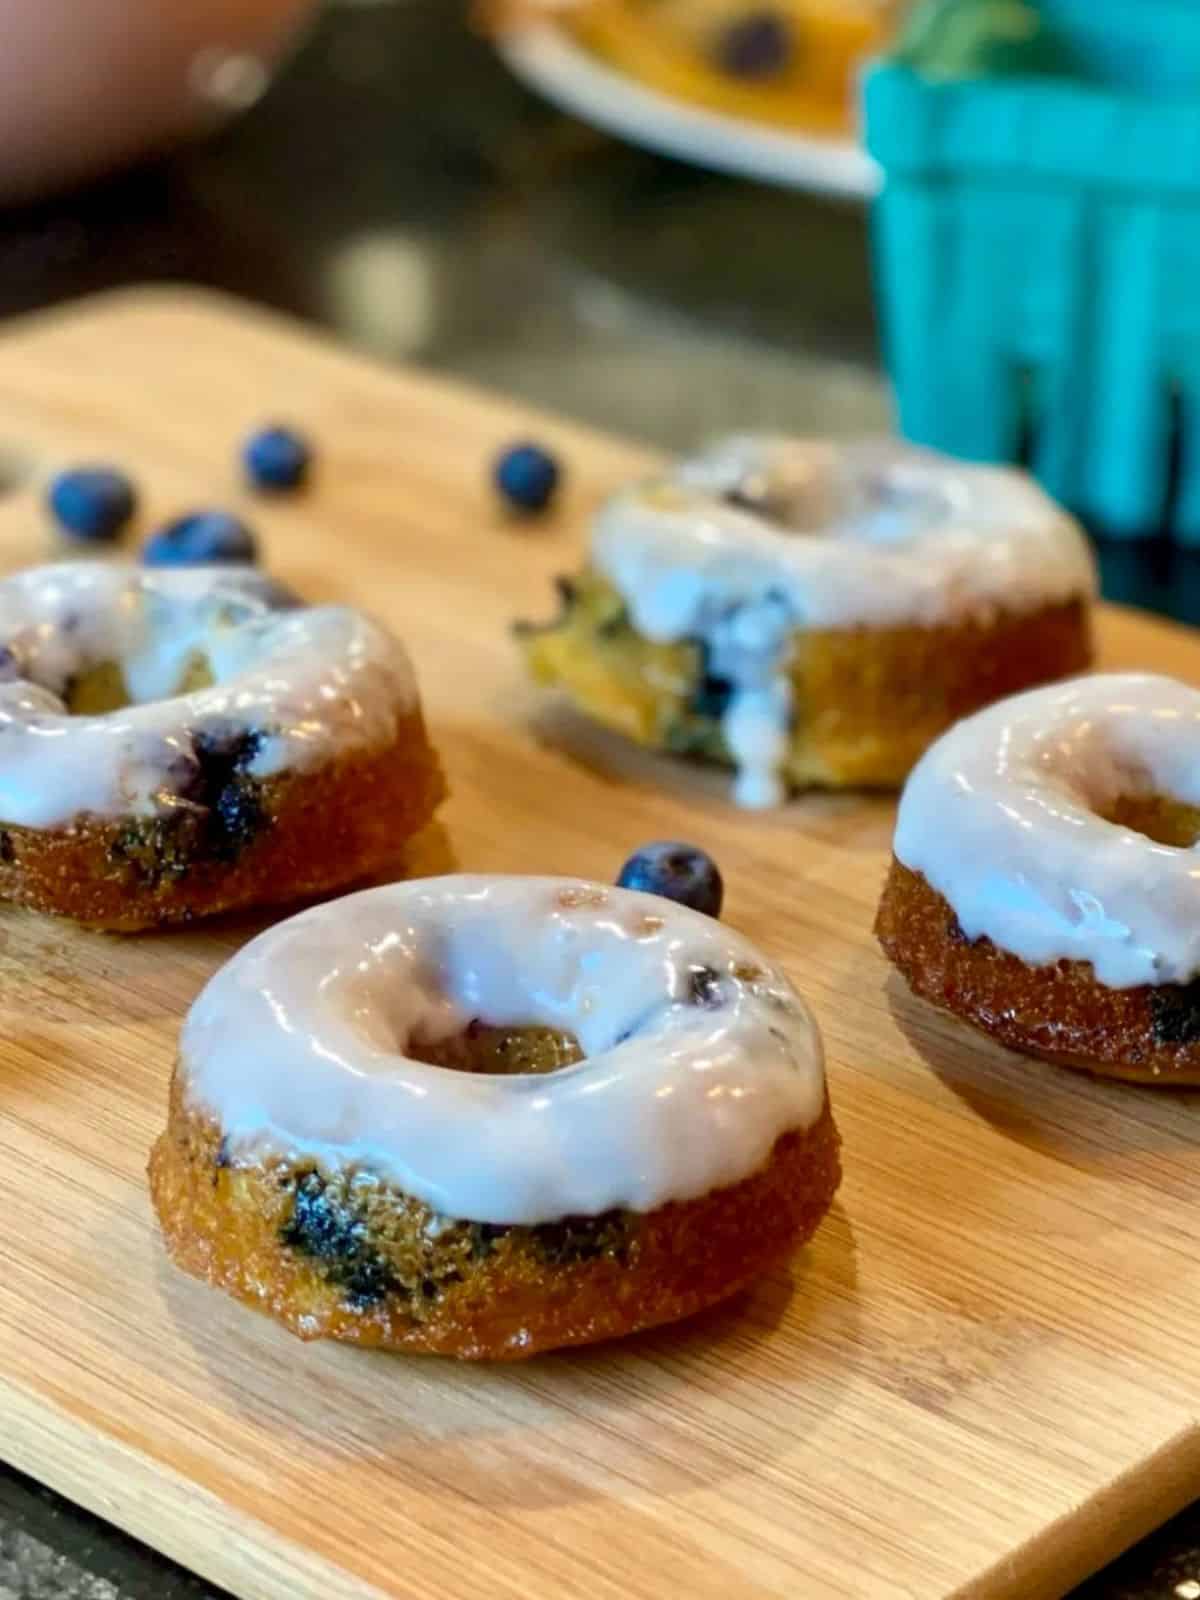 delicious blueberry donuts with a tantalizing lemon glaze and fresh blueberries.